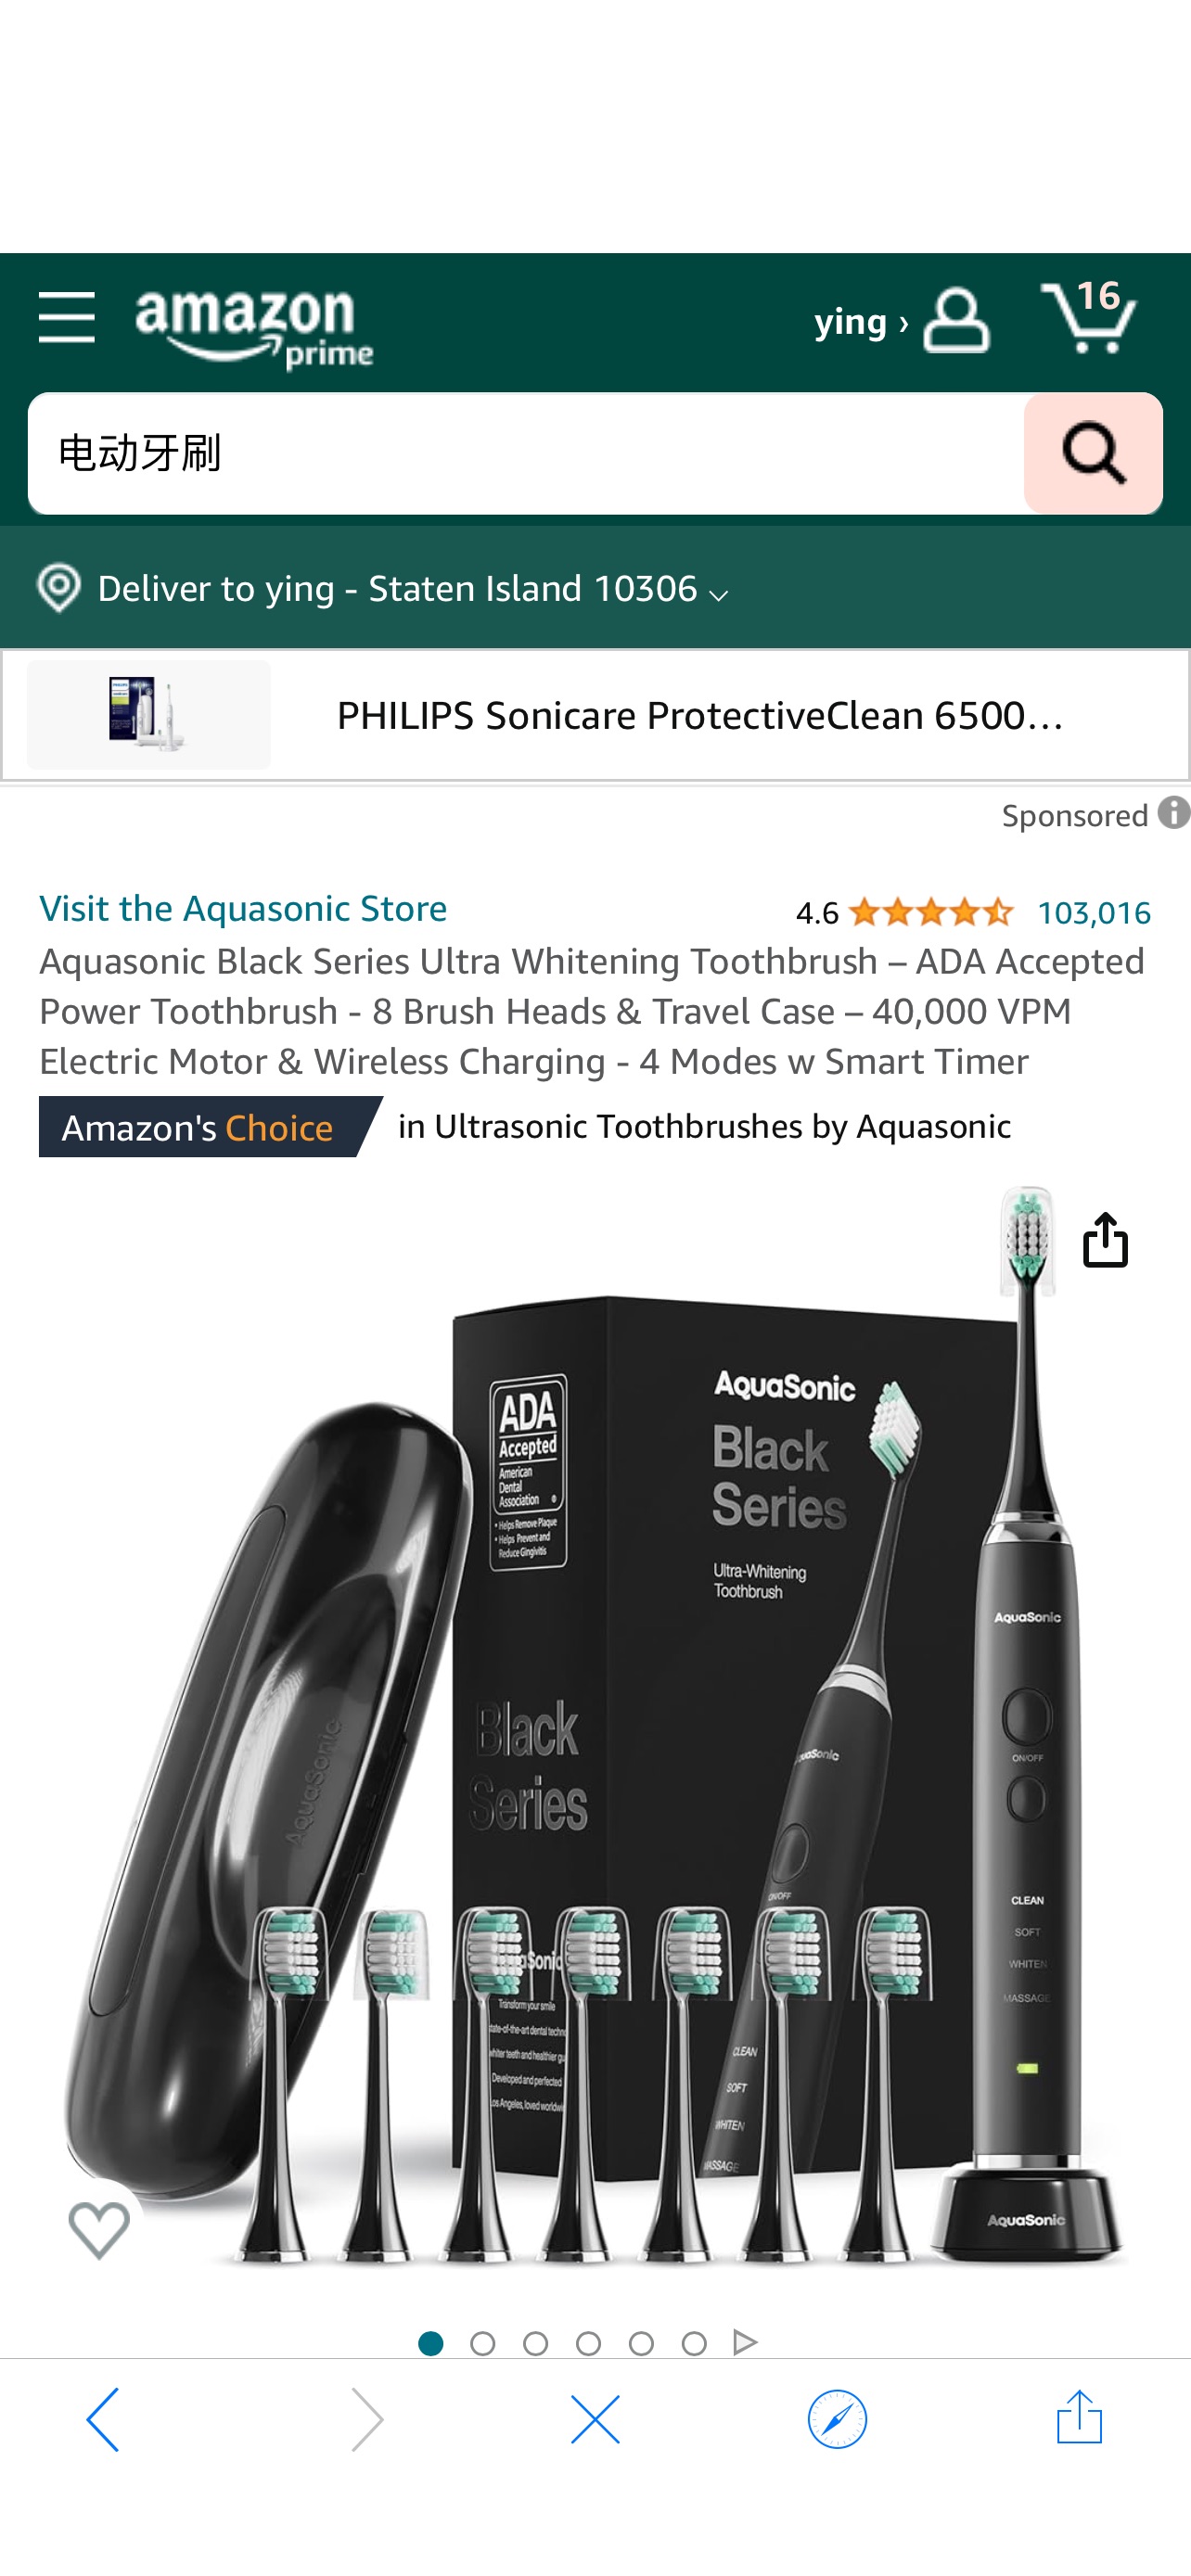 Amazon.com: Aquasonic Black Series Ultra Whitening Toothbrush – ADA Accepted Power Toothbrush - 8 Brush Heads & Travel Case – 40,000 VPM Electric Motor & Wireless Charging - 4 Modes w Smart Timer : He